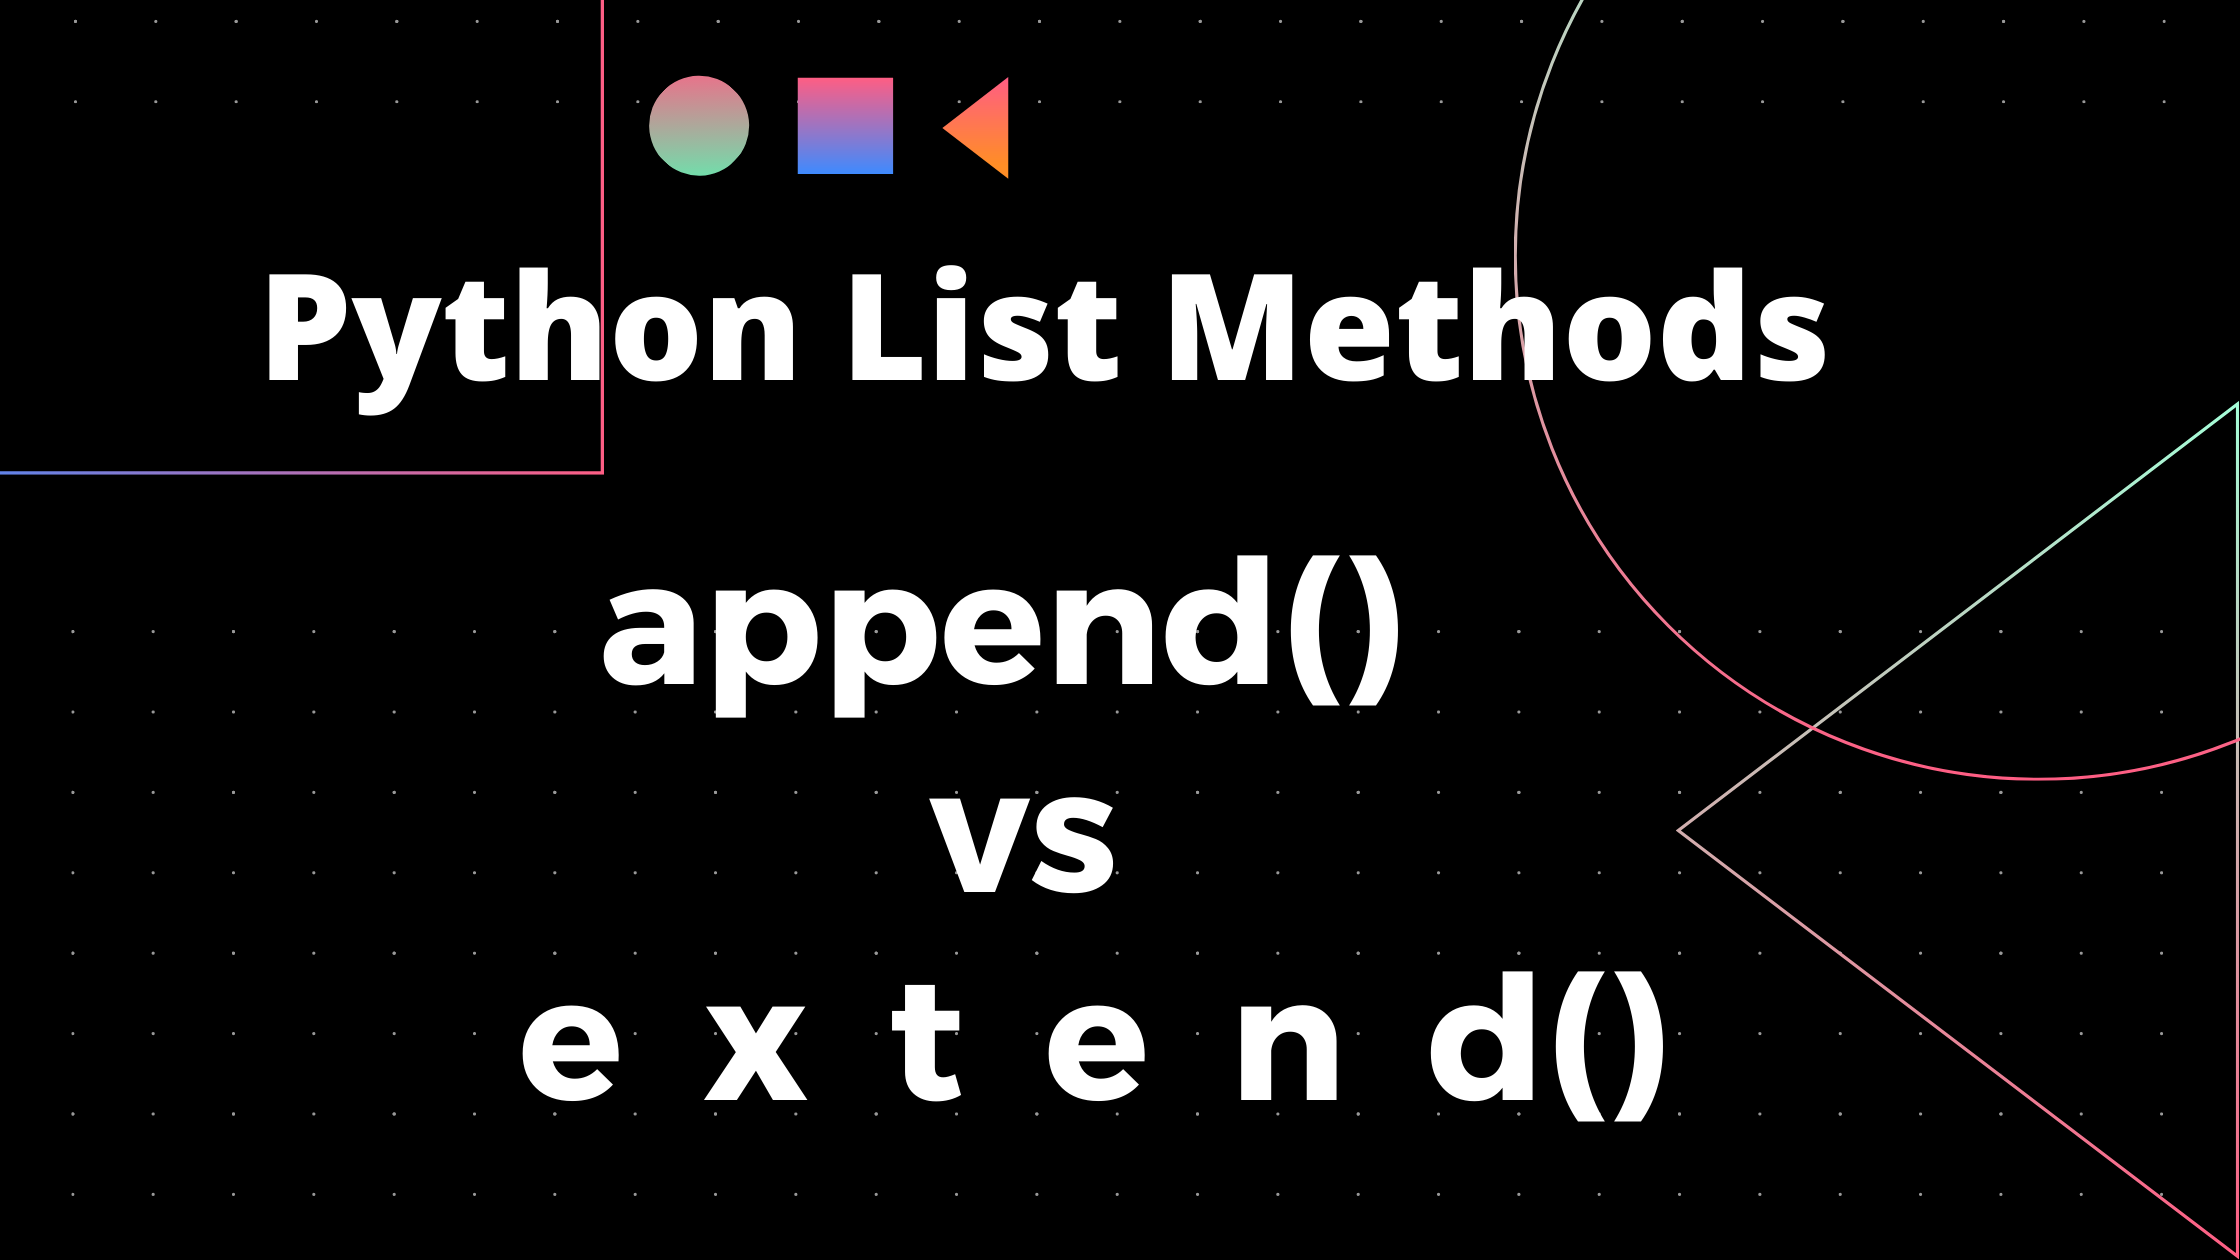 Python Extend  Different Examples of Python Extend